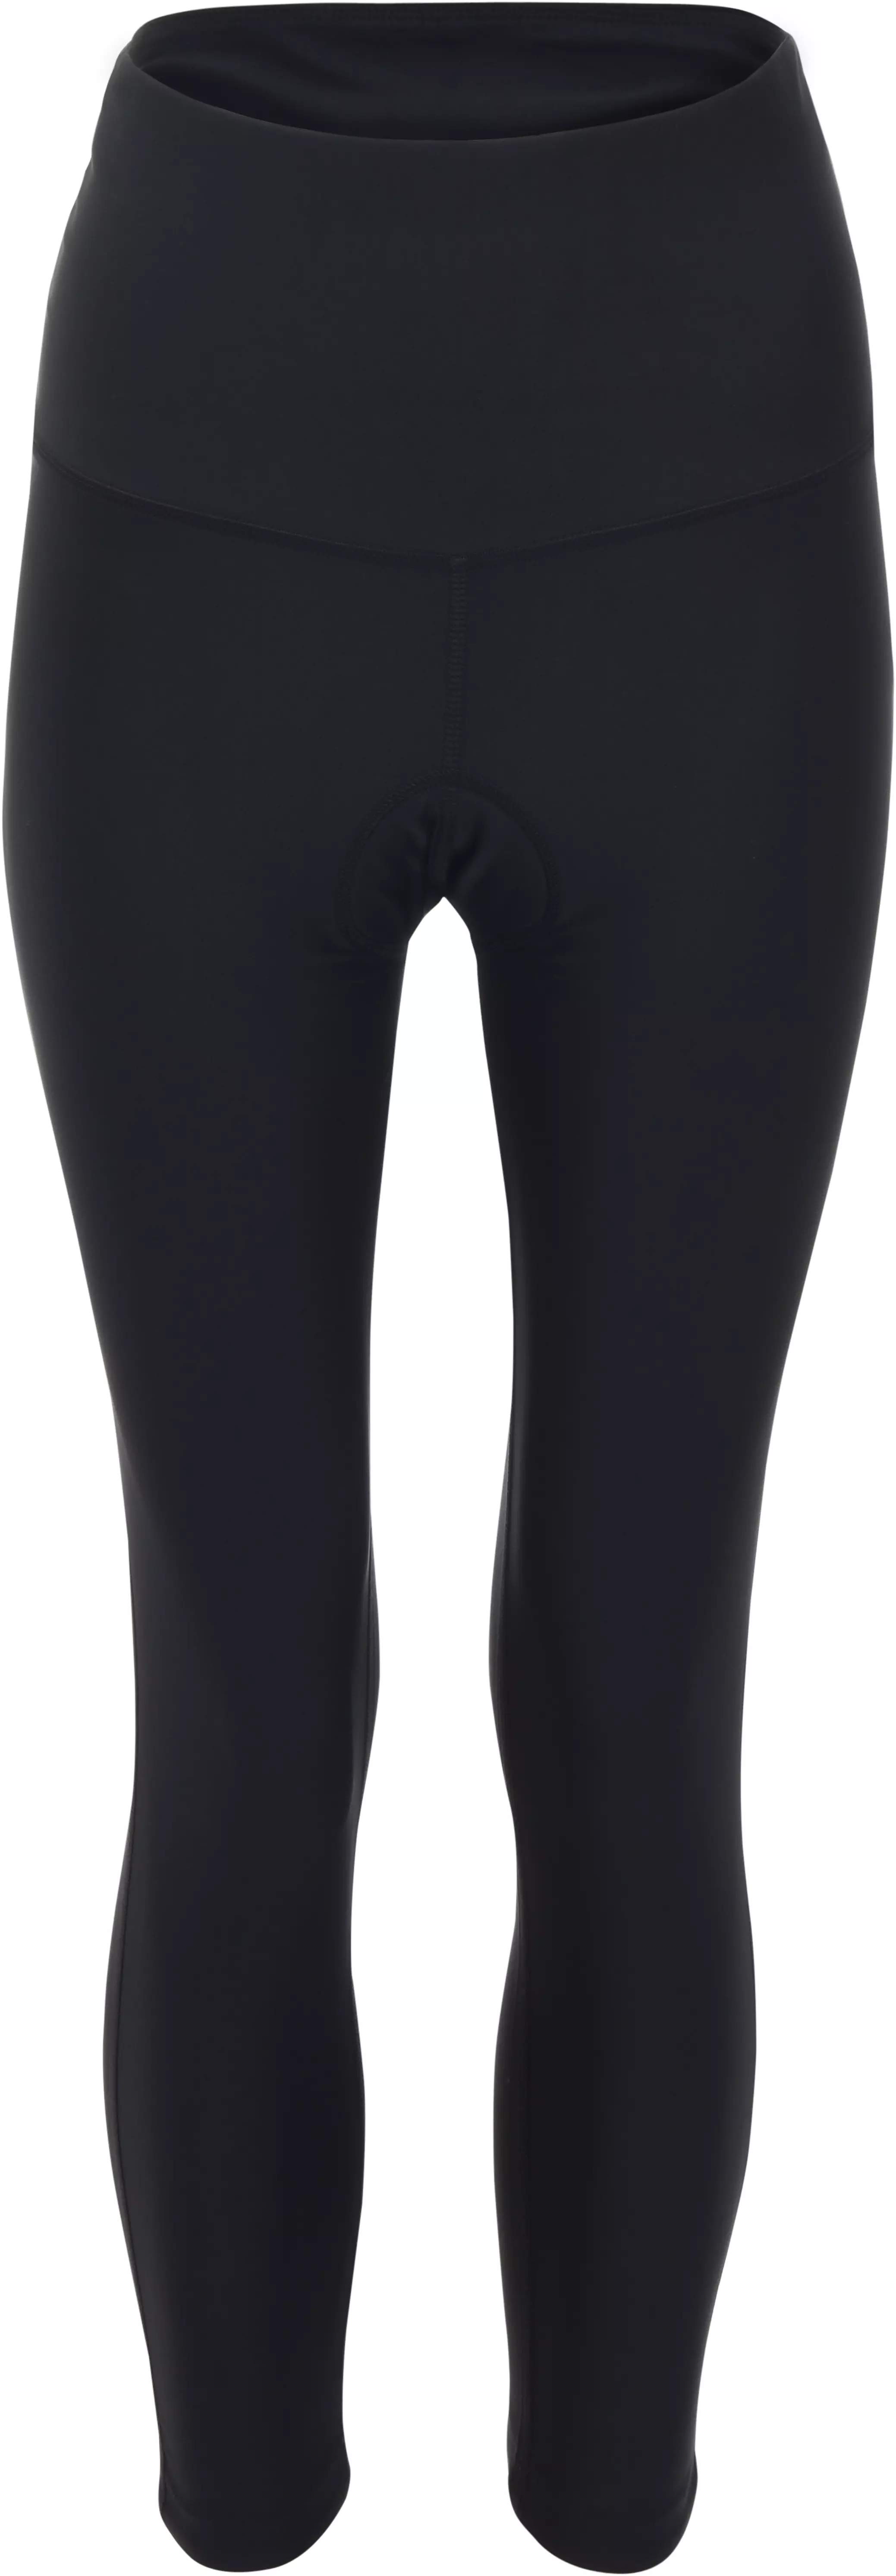 ladies cycling leggings with padding